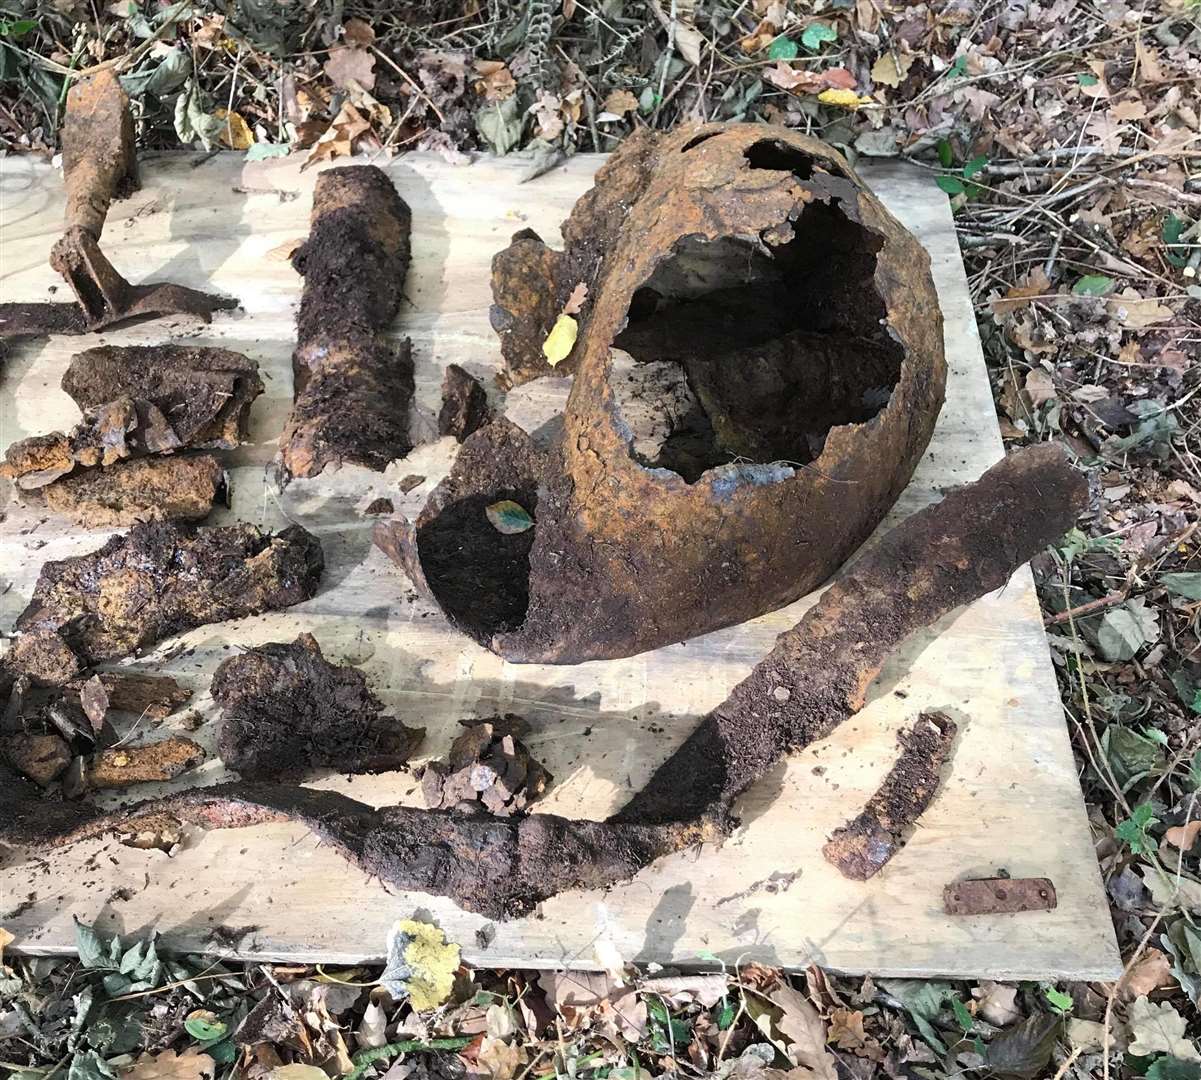 Pieces of the rocket have already been recovered